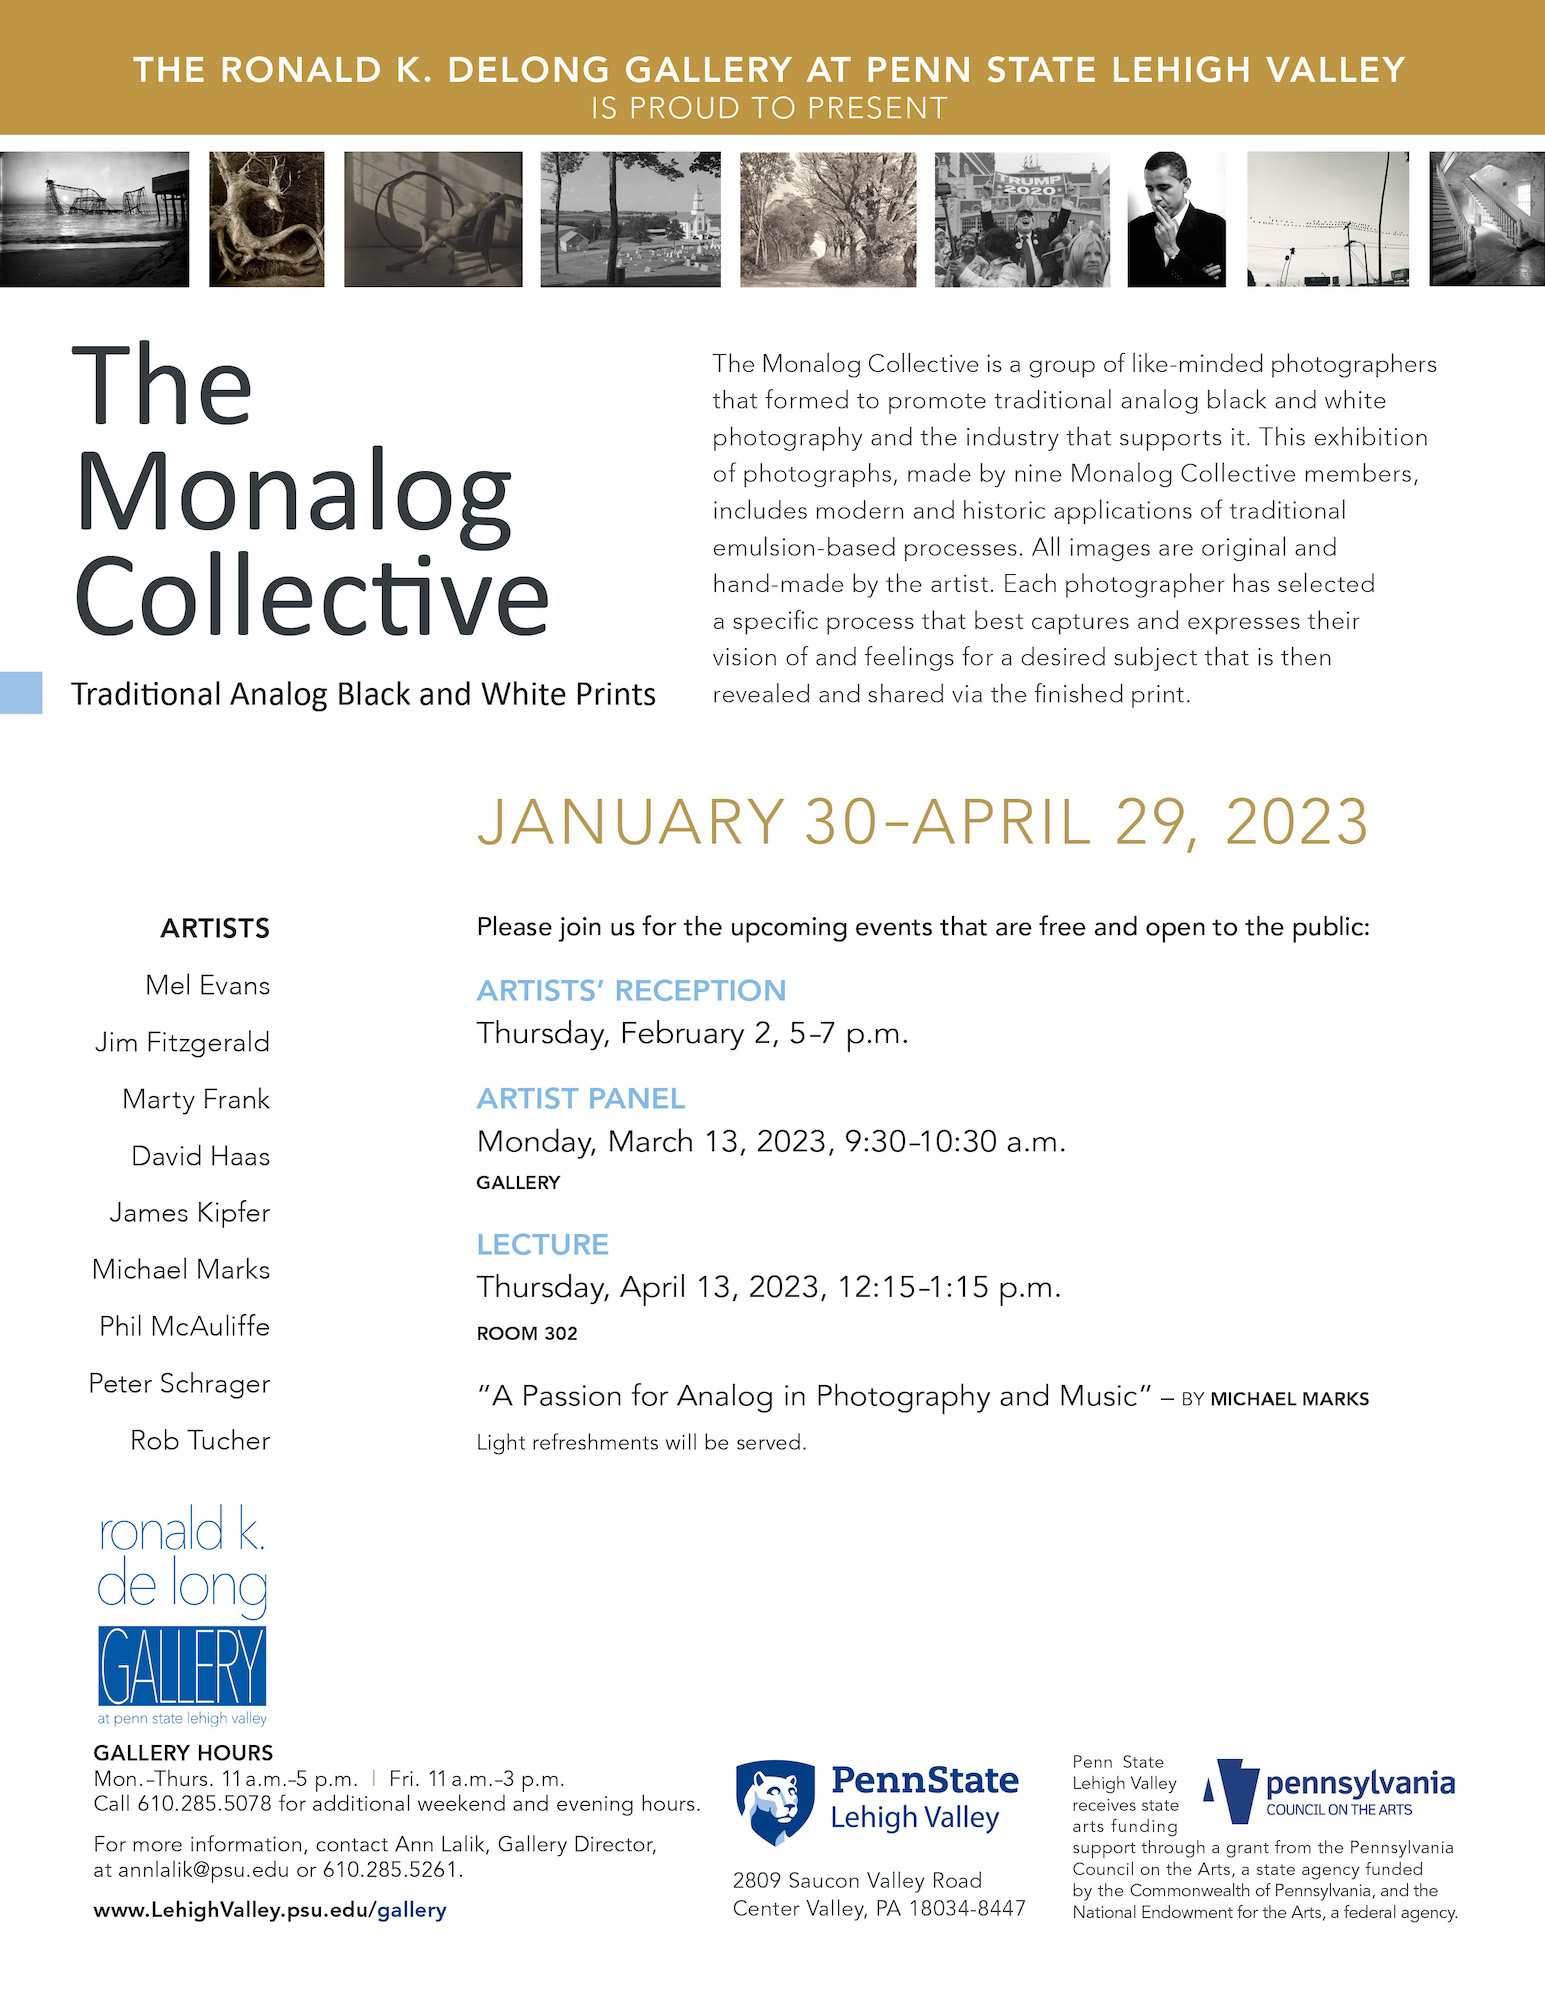 Monalog Collective Show at the Ronald K. Delong Gallery, Penn State University, Lehigh Valley, Center Valley PA, January 30 – April 29th